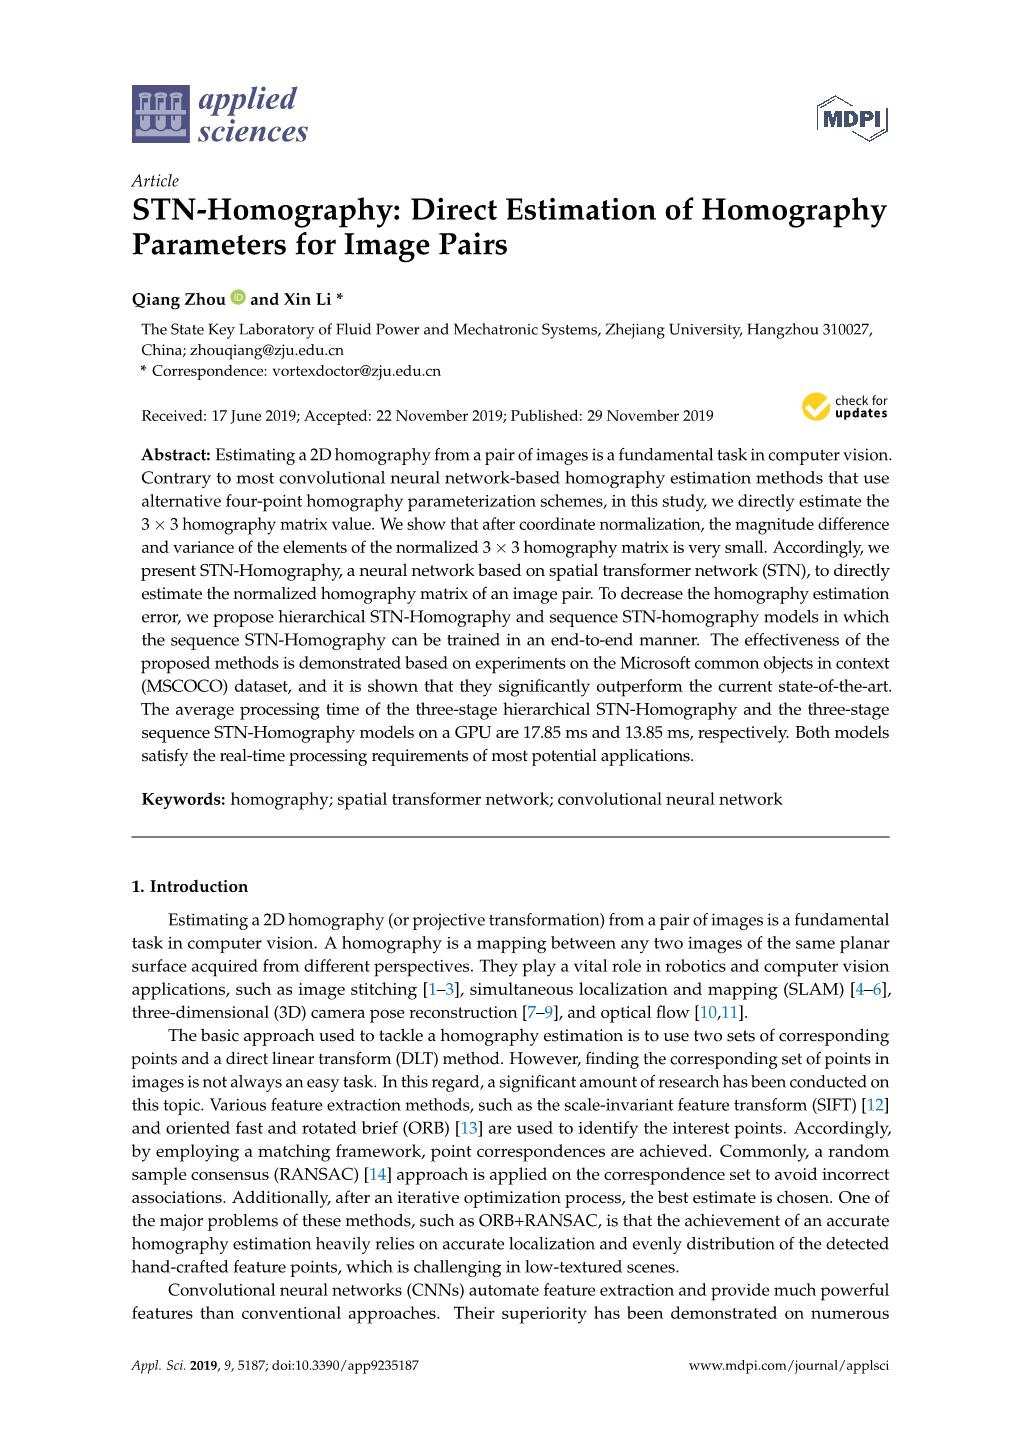 Direct Estimation of Homography Parameters for Image Pairs